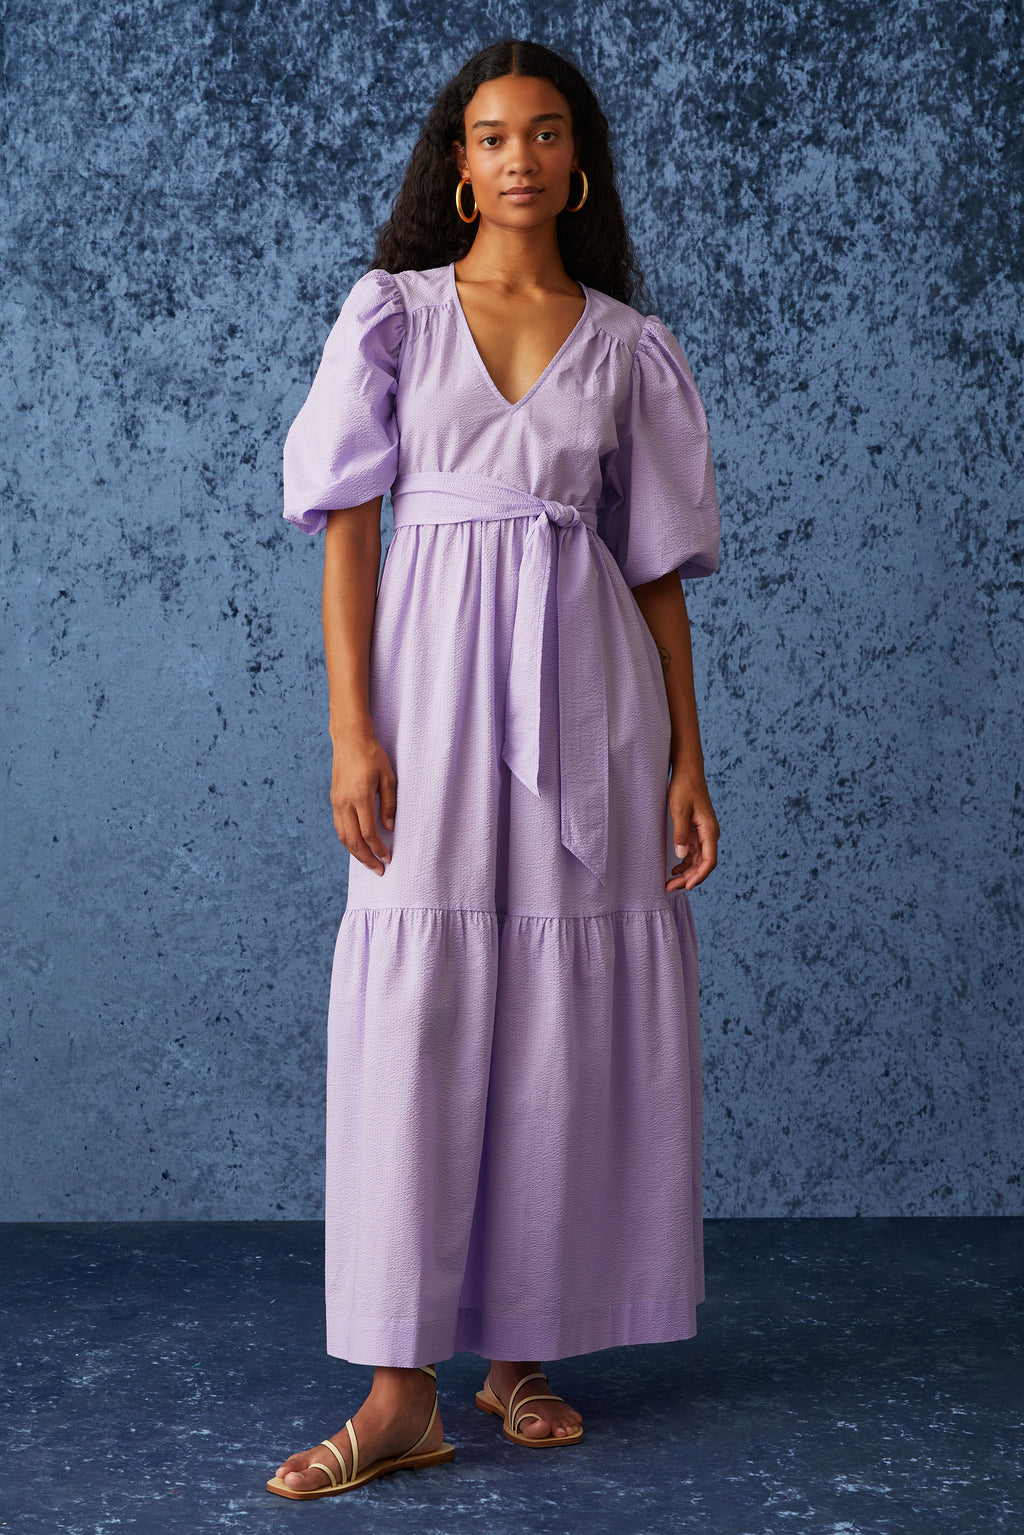 Light purple maxi dress with large puff sleeves and a v-neckline